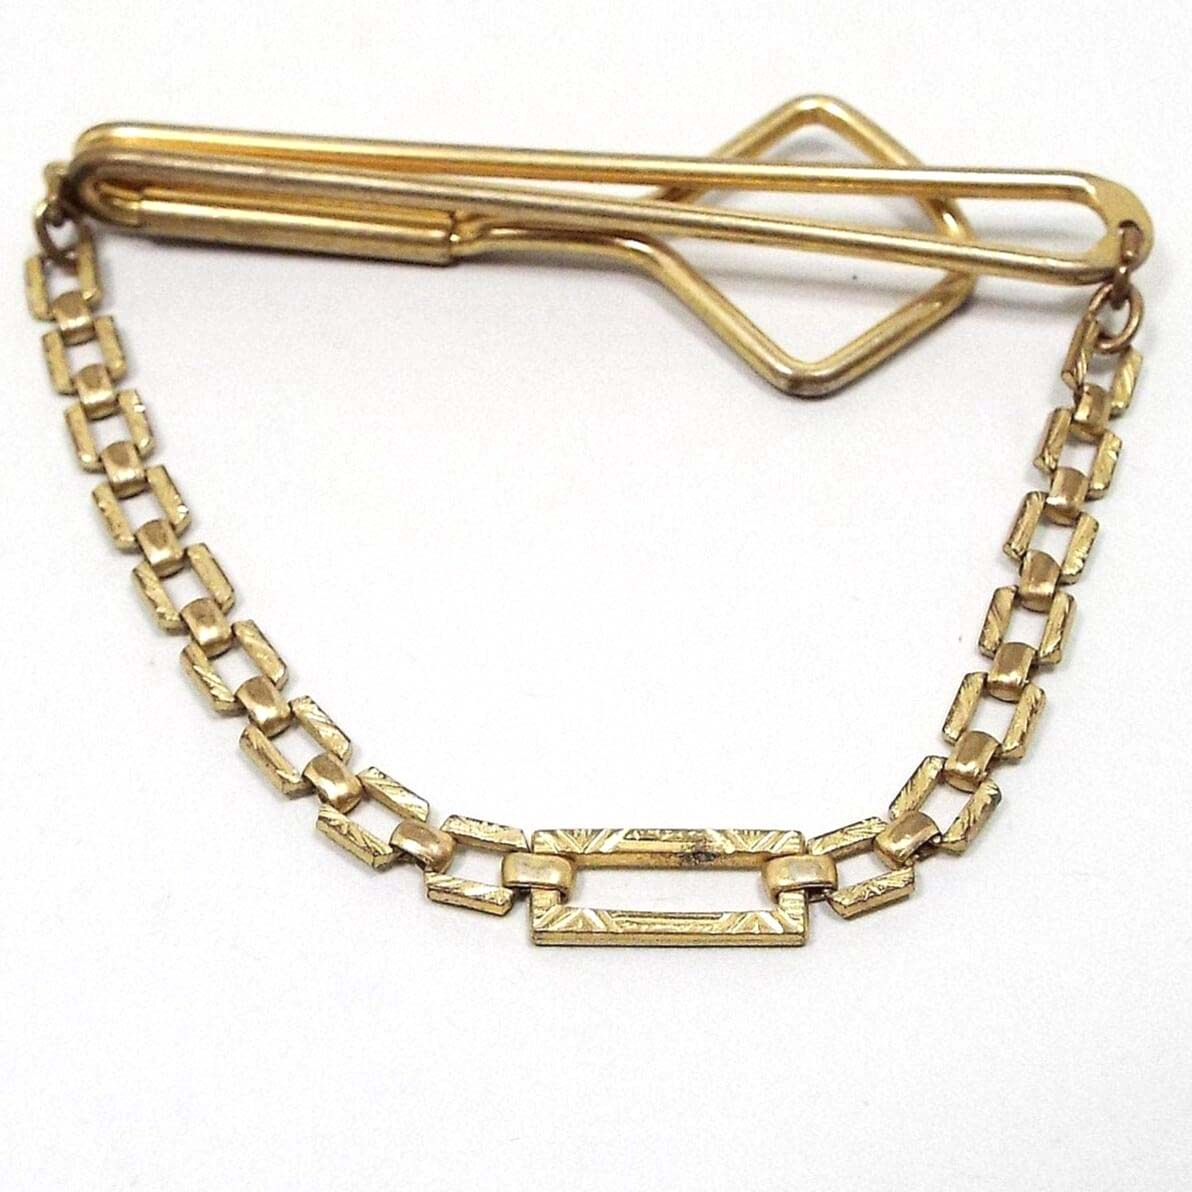 Front view of the 1930's vintage Swank tie chain bar. The metal is gold tone in color. The top bar is an wire open oval that curves around to the back with another wider open oval on the end. A flat style textured square link chain hangs down from each side to a larger textured rectangle link on the bottom.